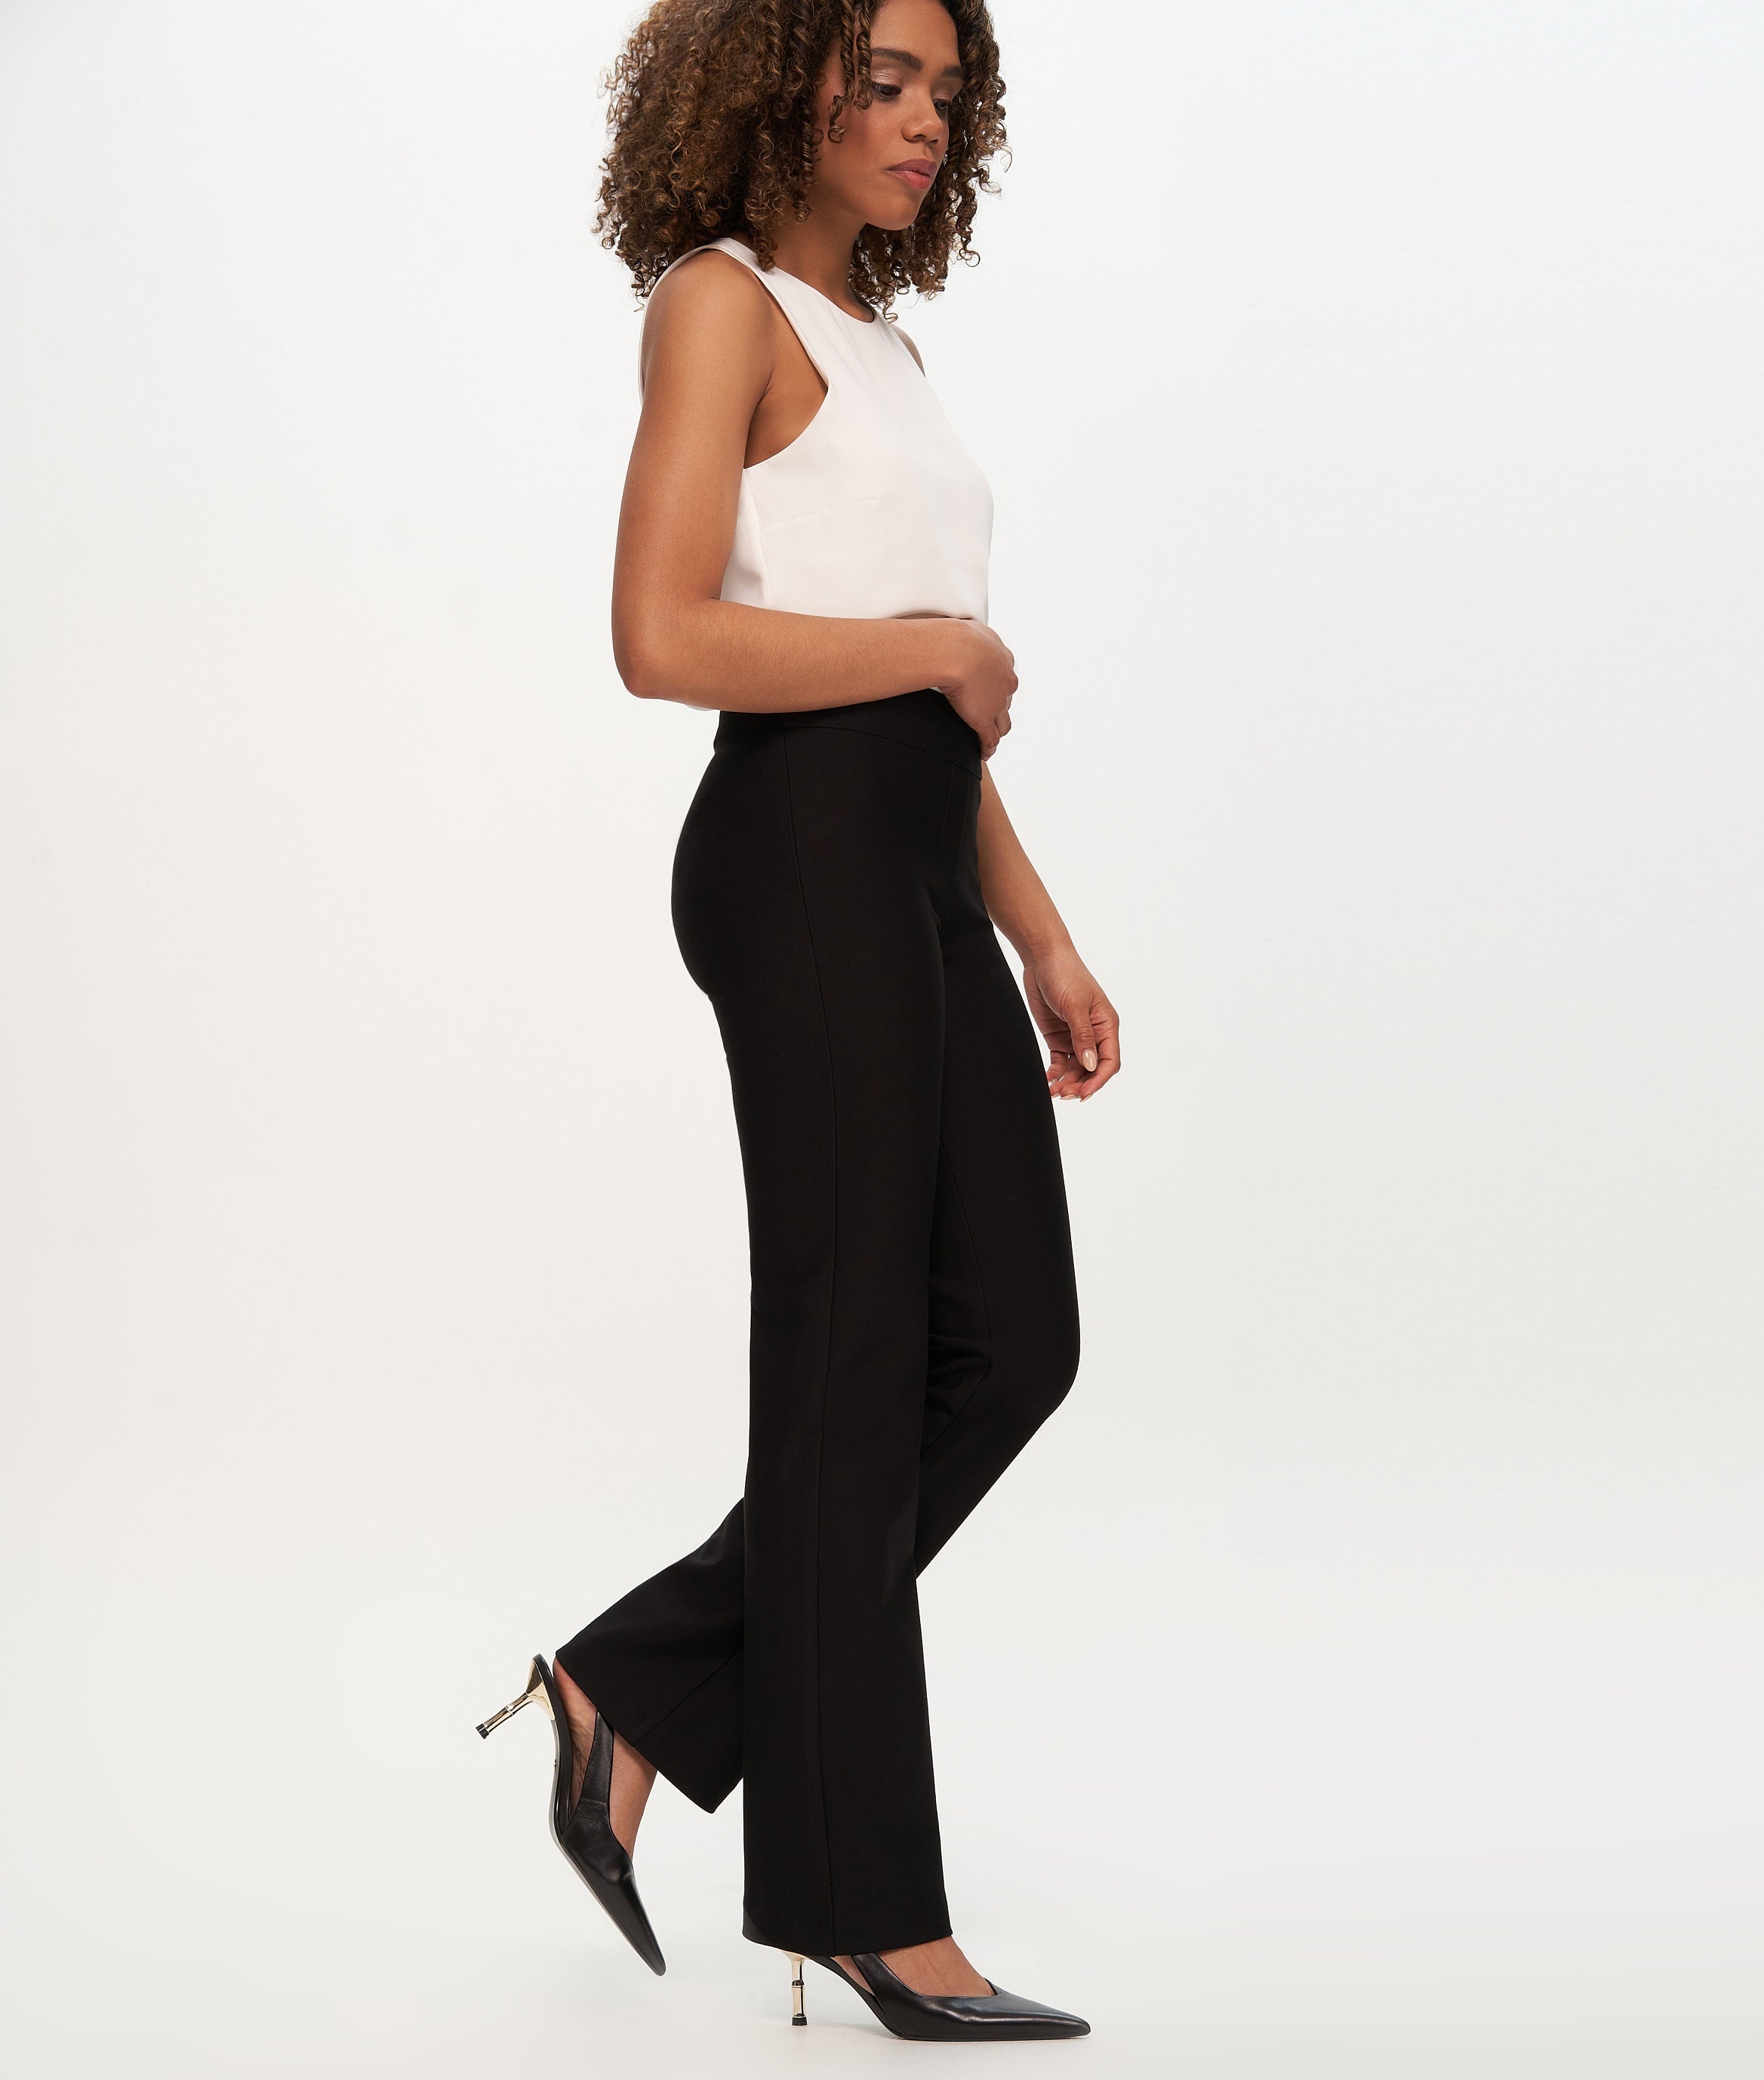 Jyeity Office Approved, Spring/Pocket Button Mid Waist Tight Pants